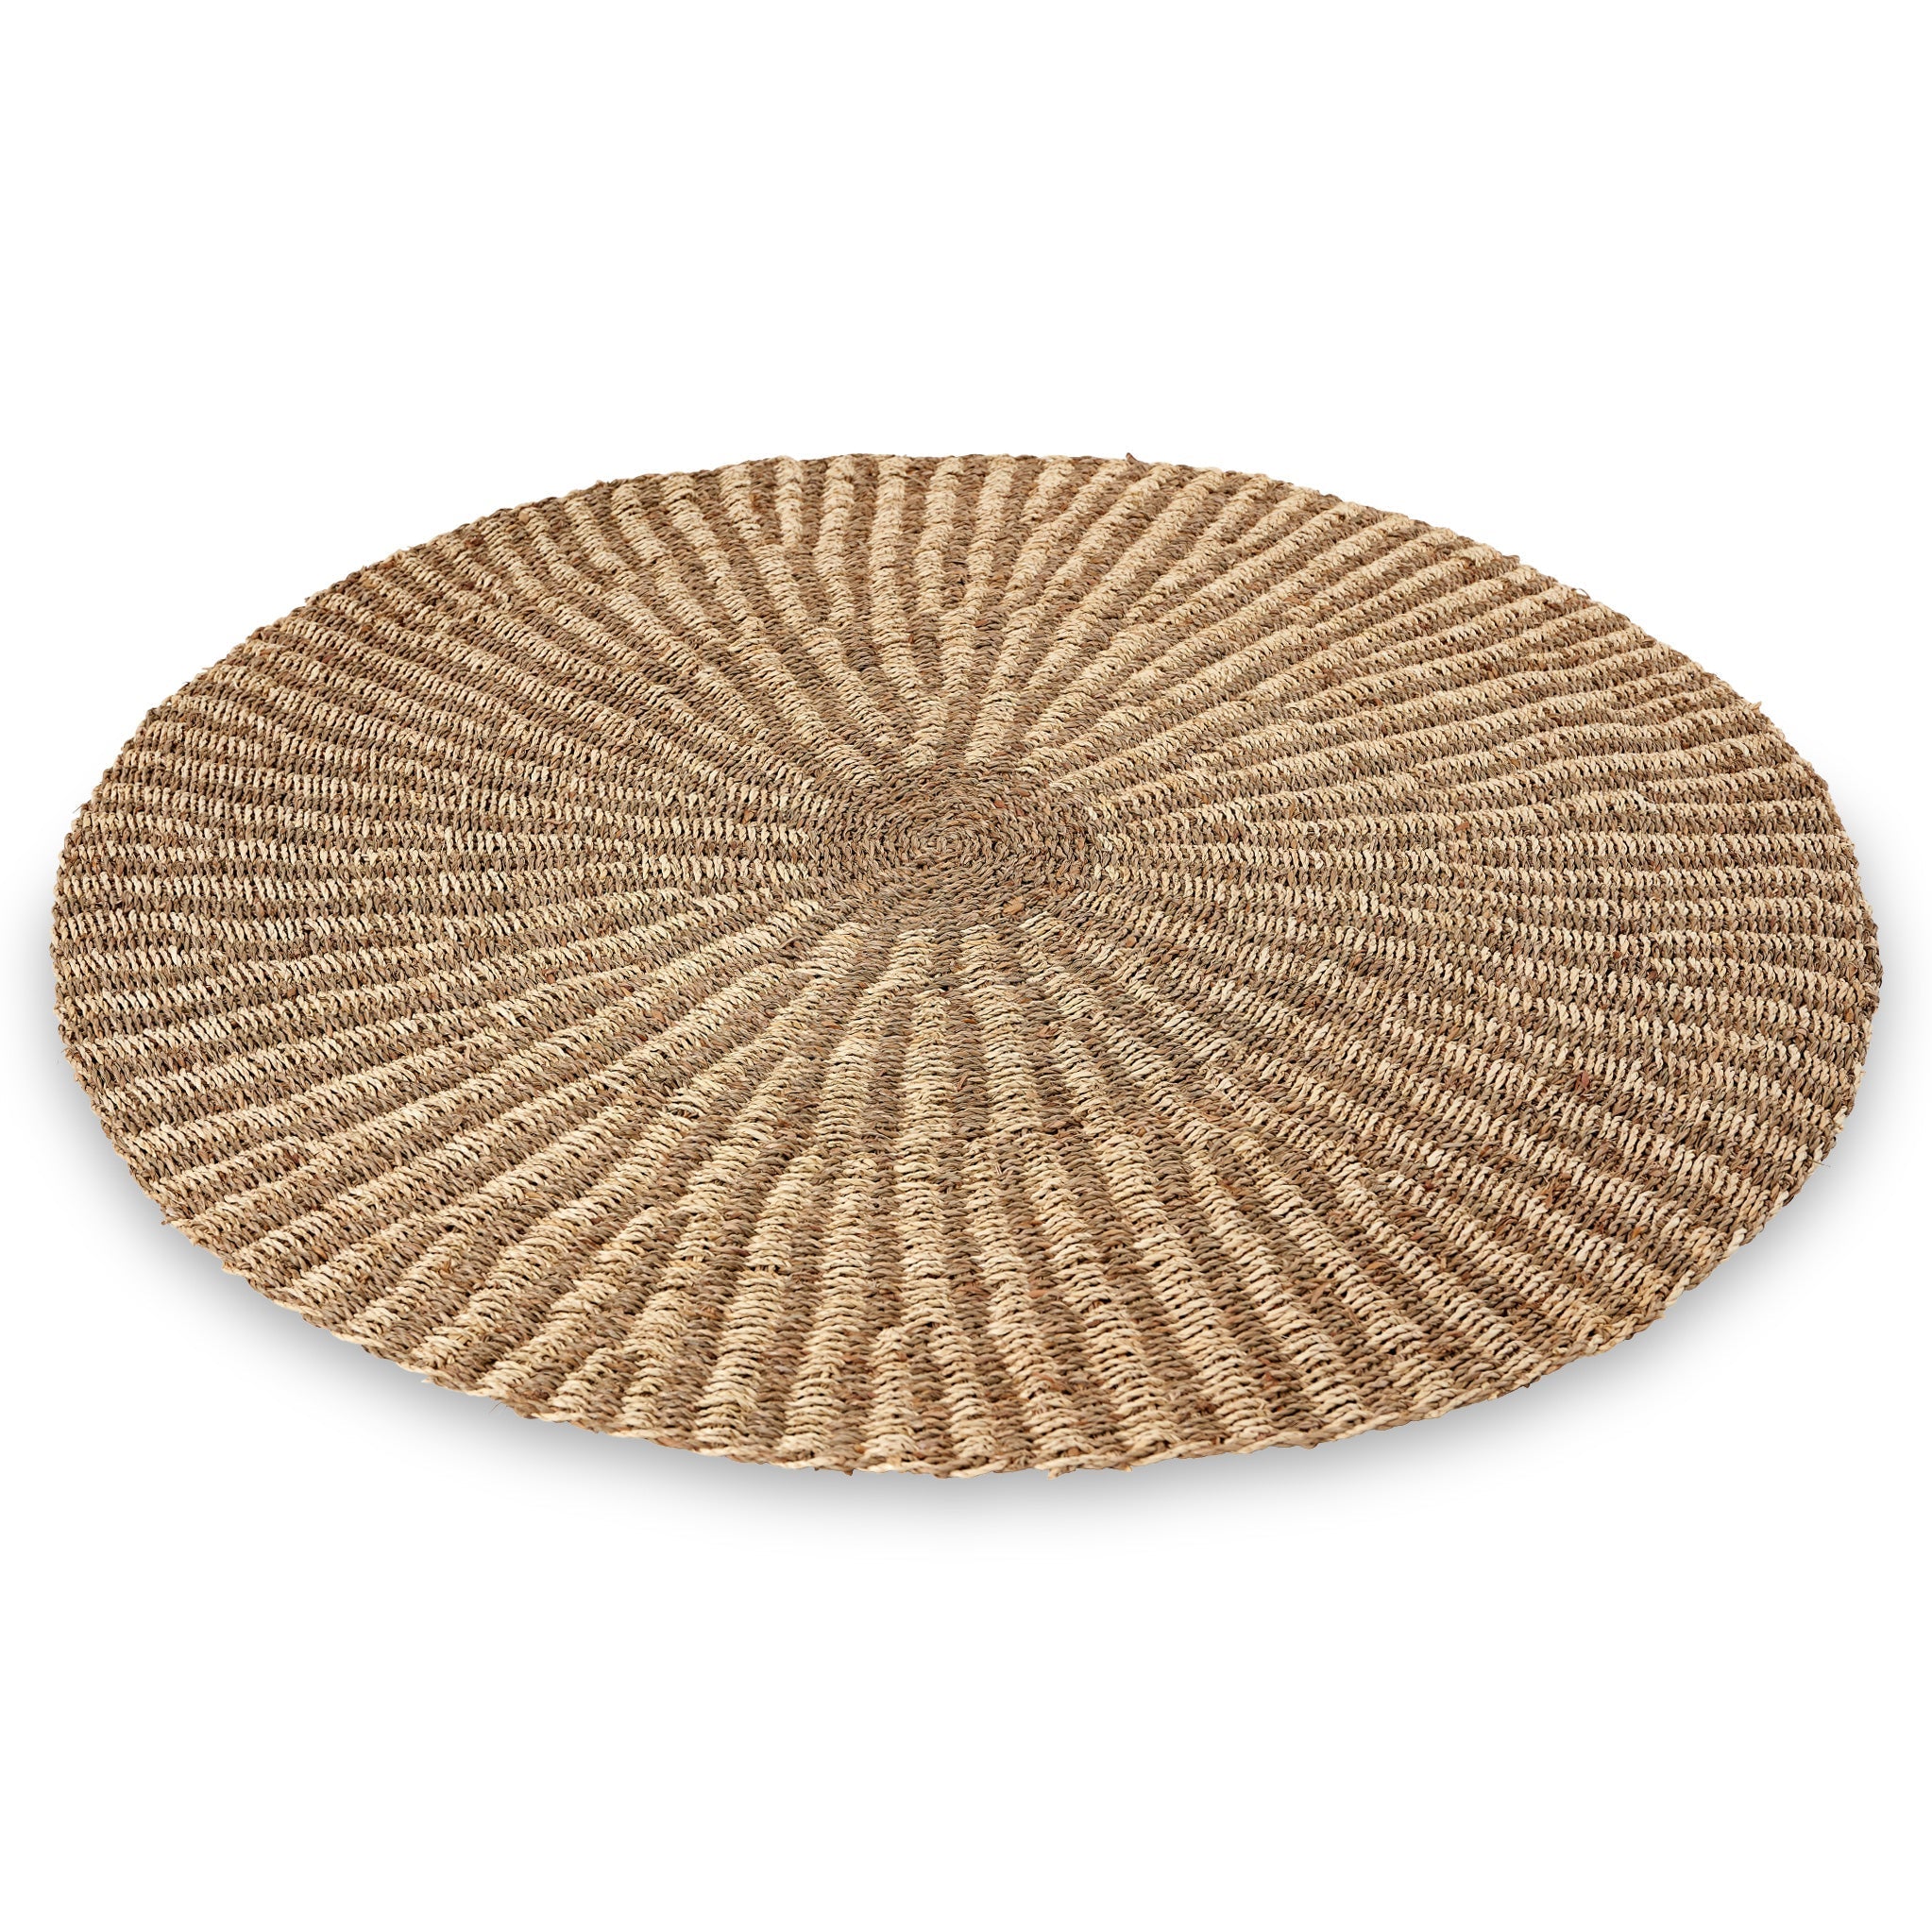 Woven Seagrass And Palm Leaf Circular Round Natural Rug Roseland